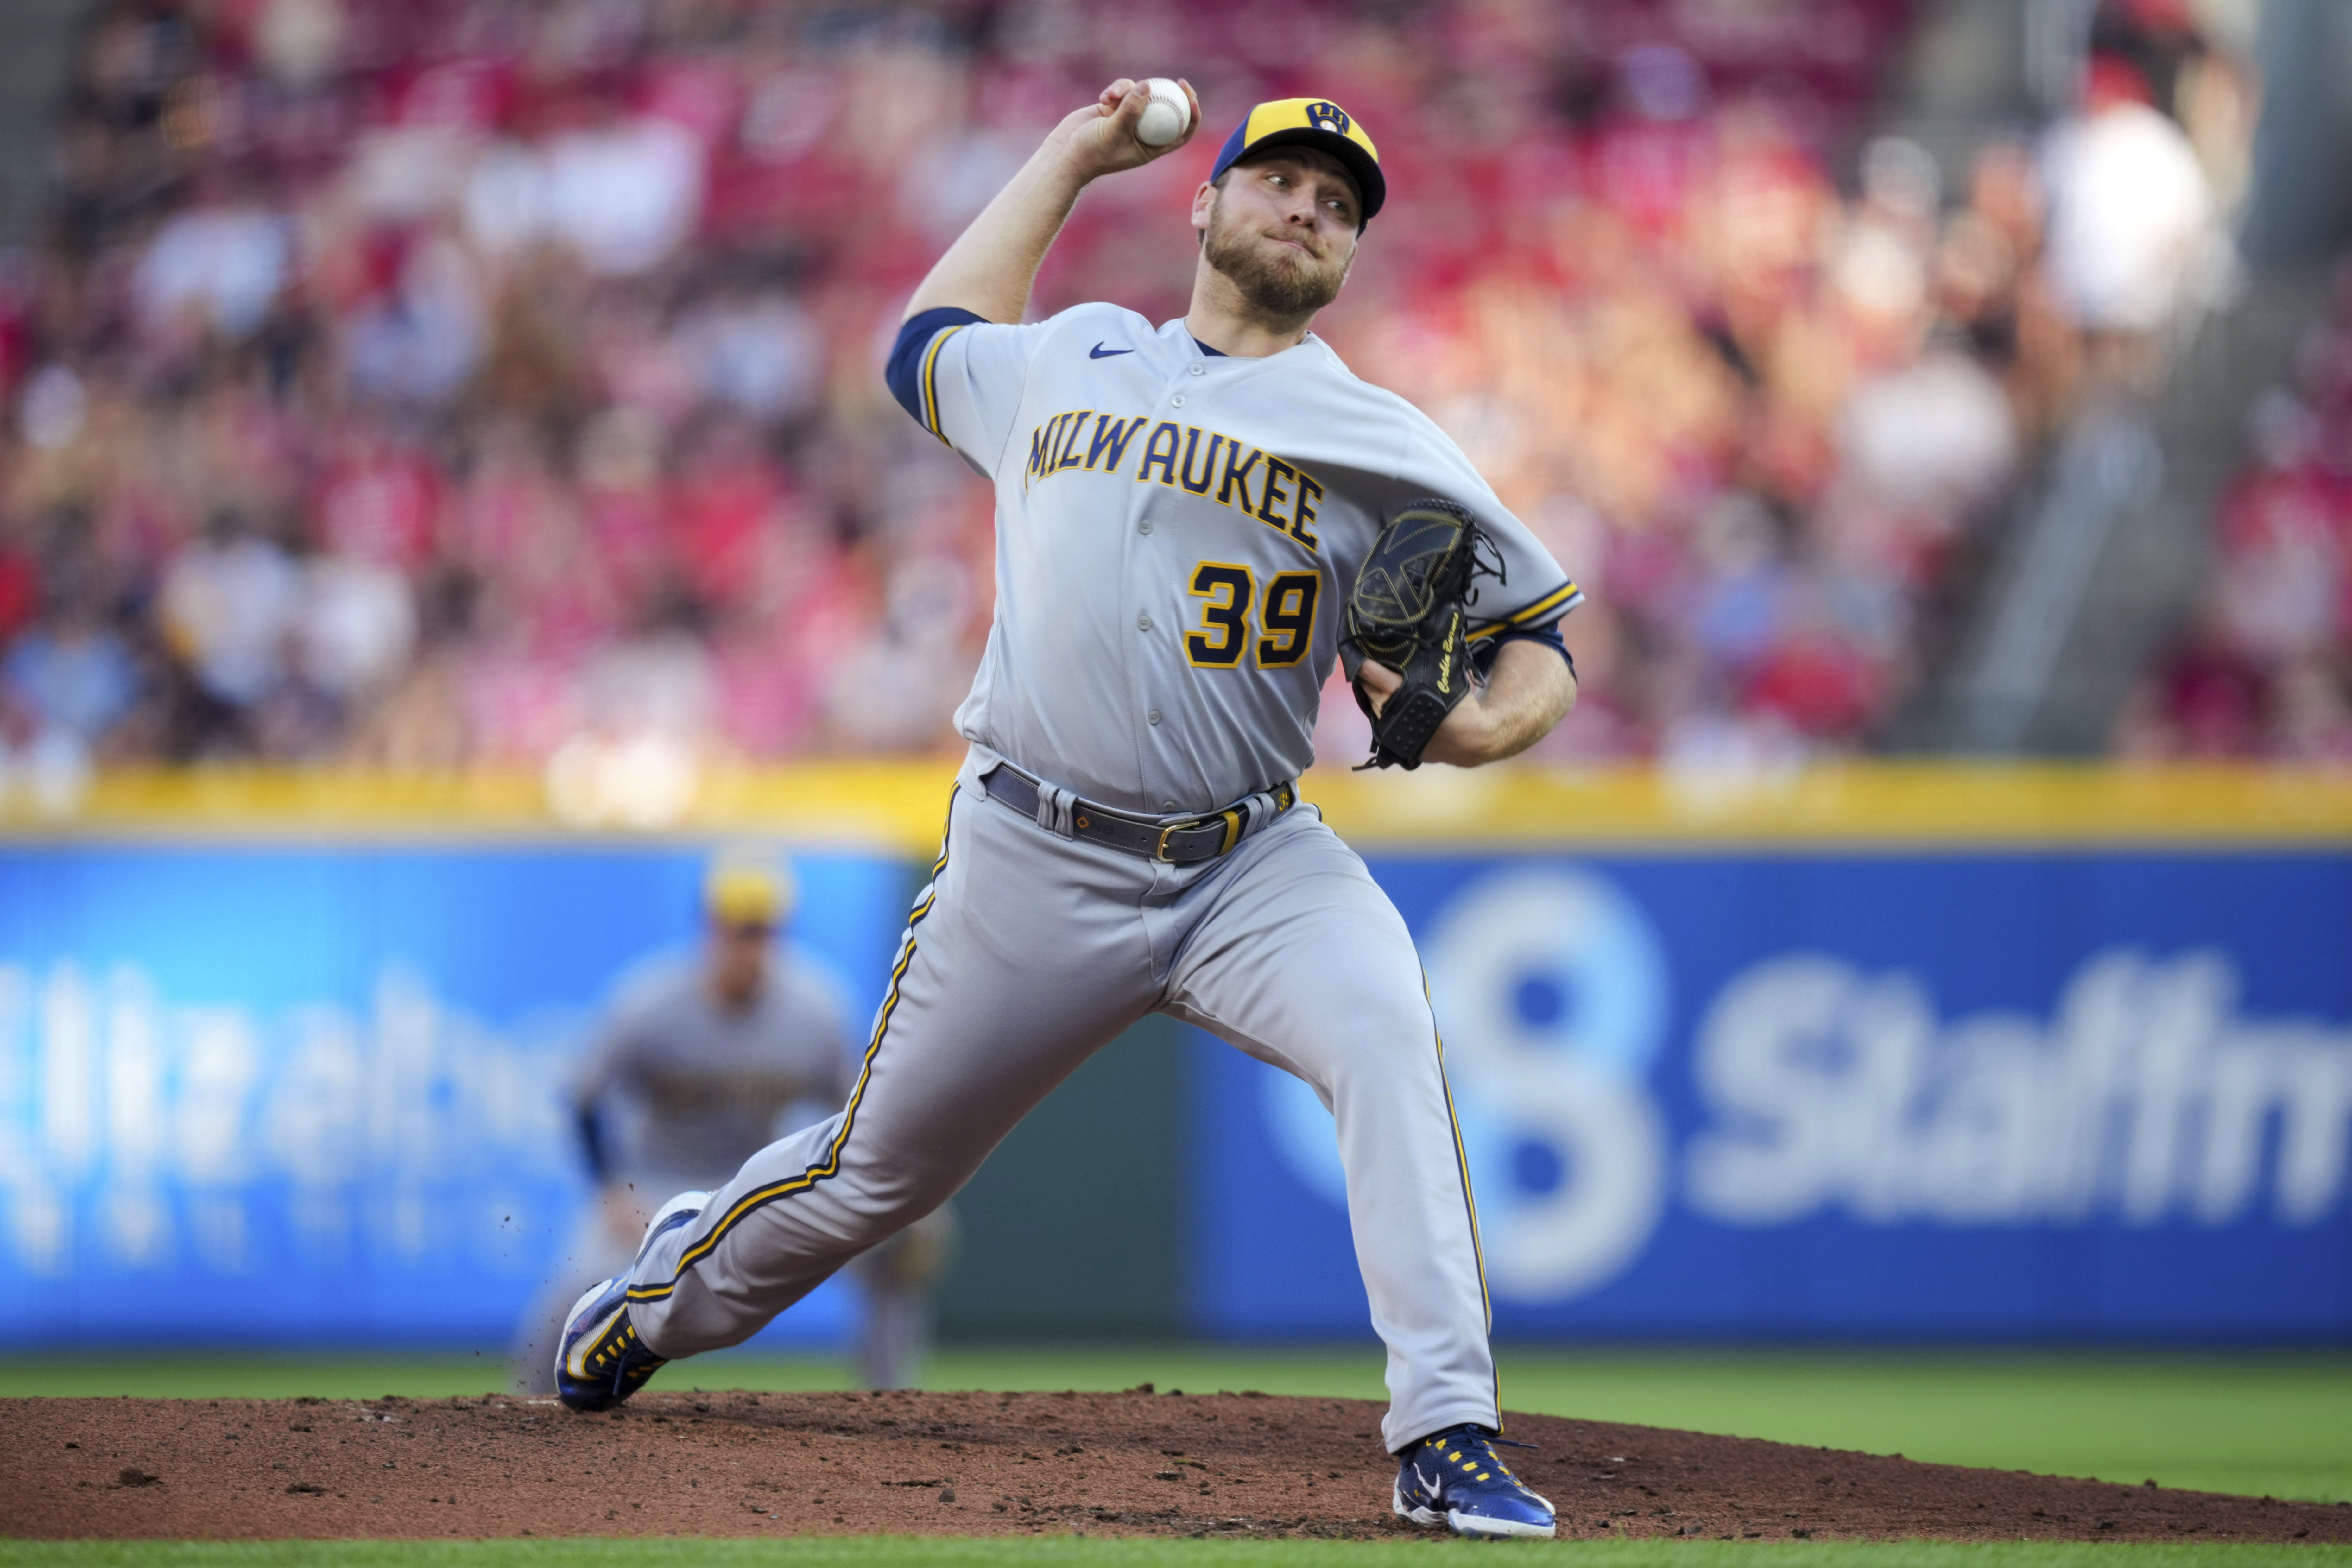 Brewers' Burnes overcomes dizzy spell to dominate Reds